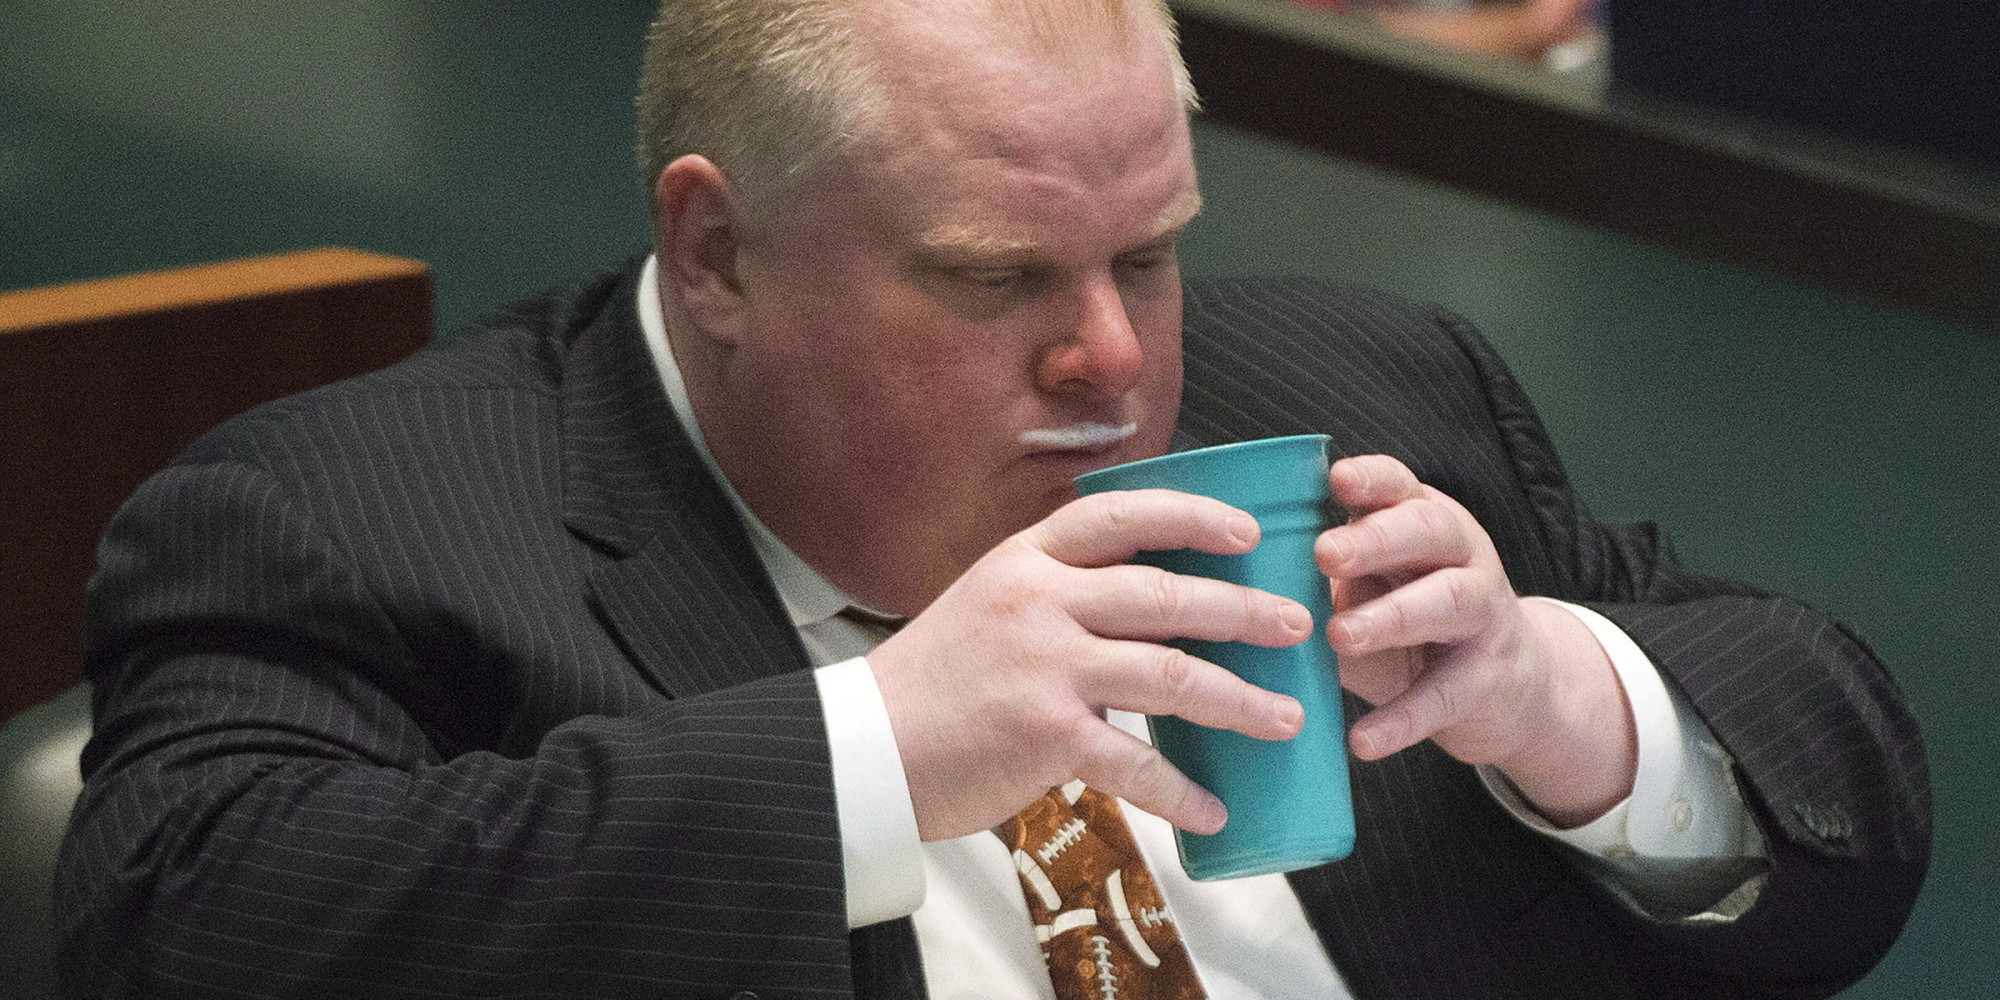 Rob ford youtube council meeting #10